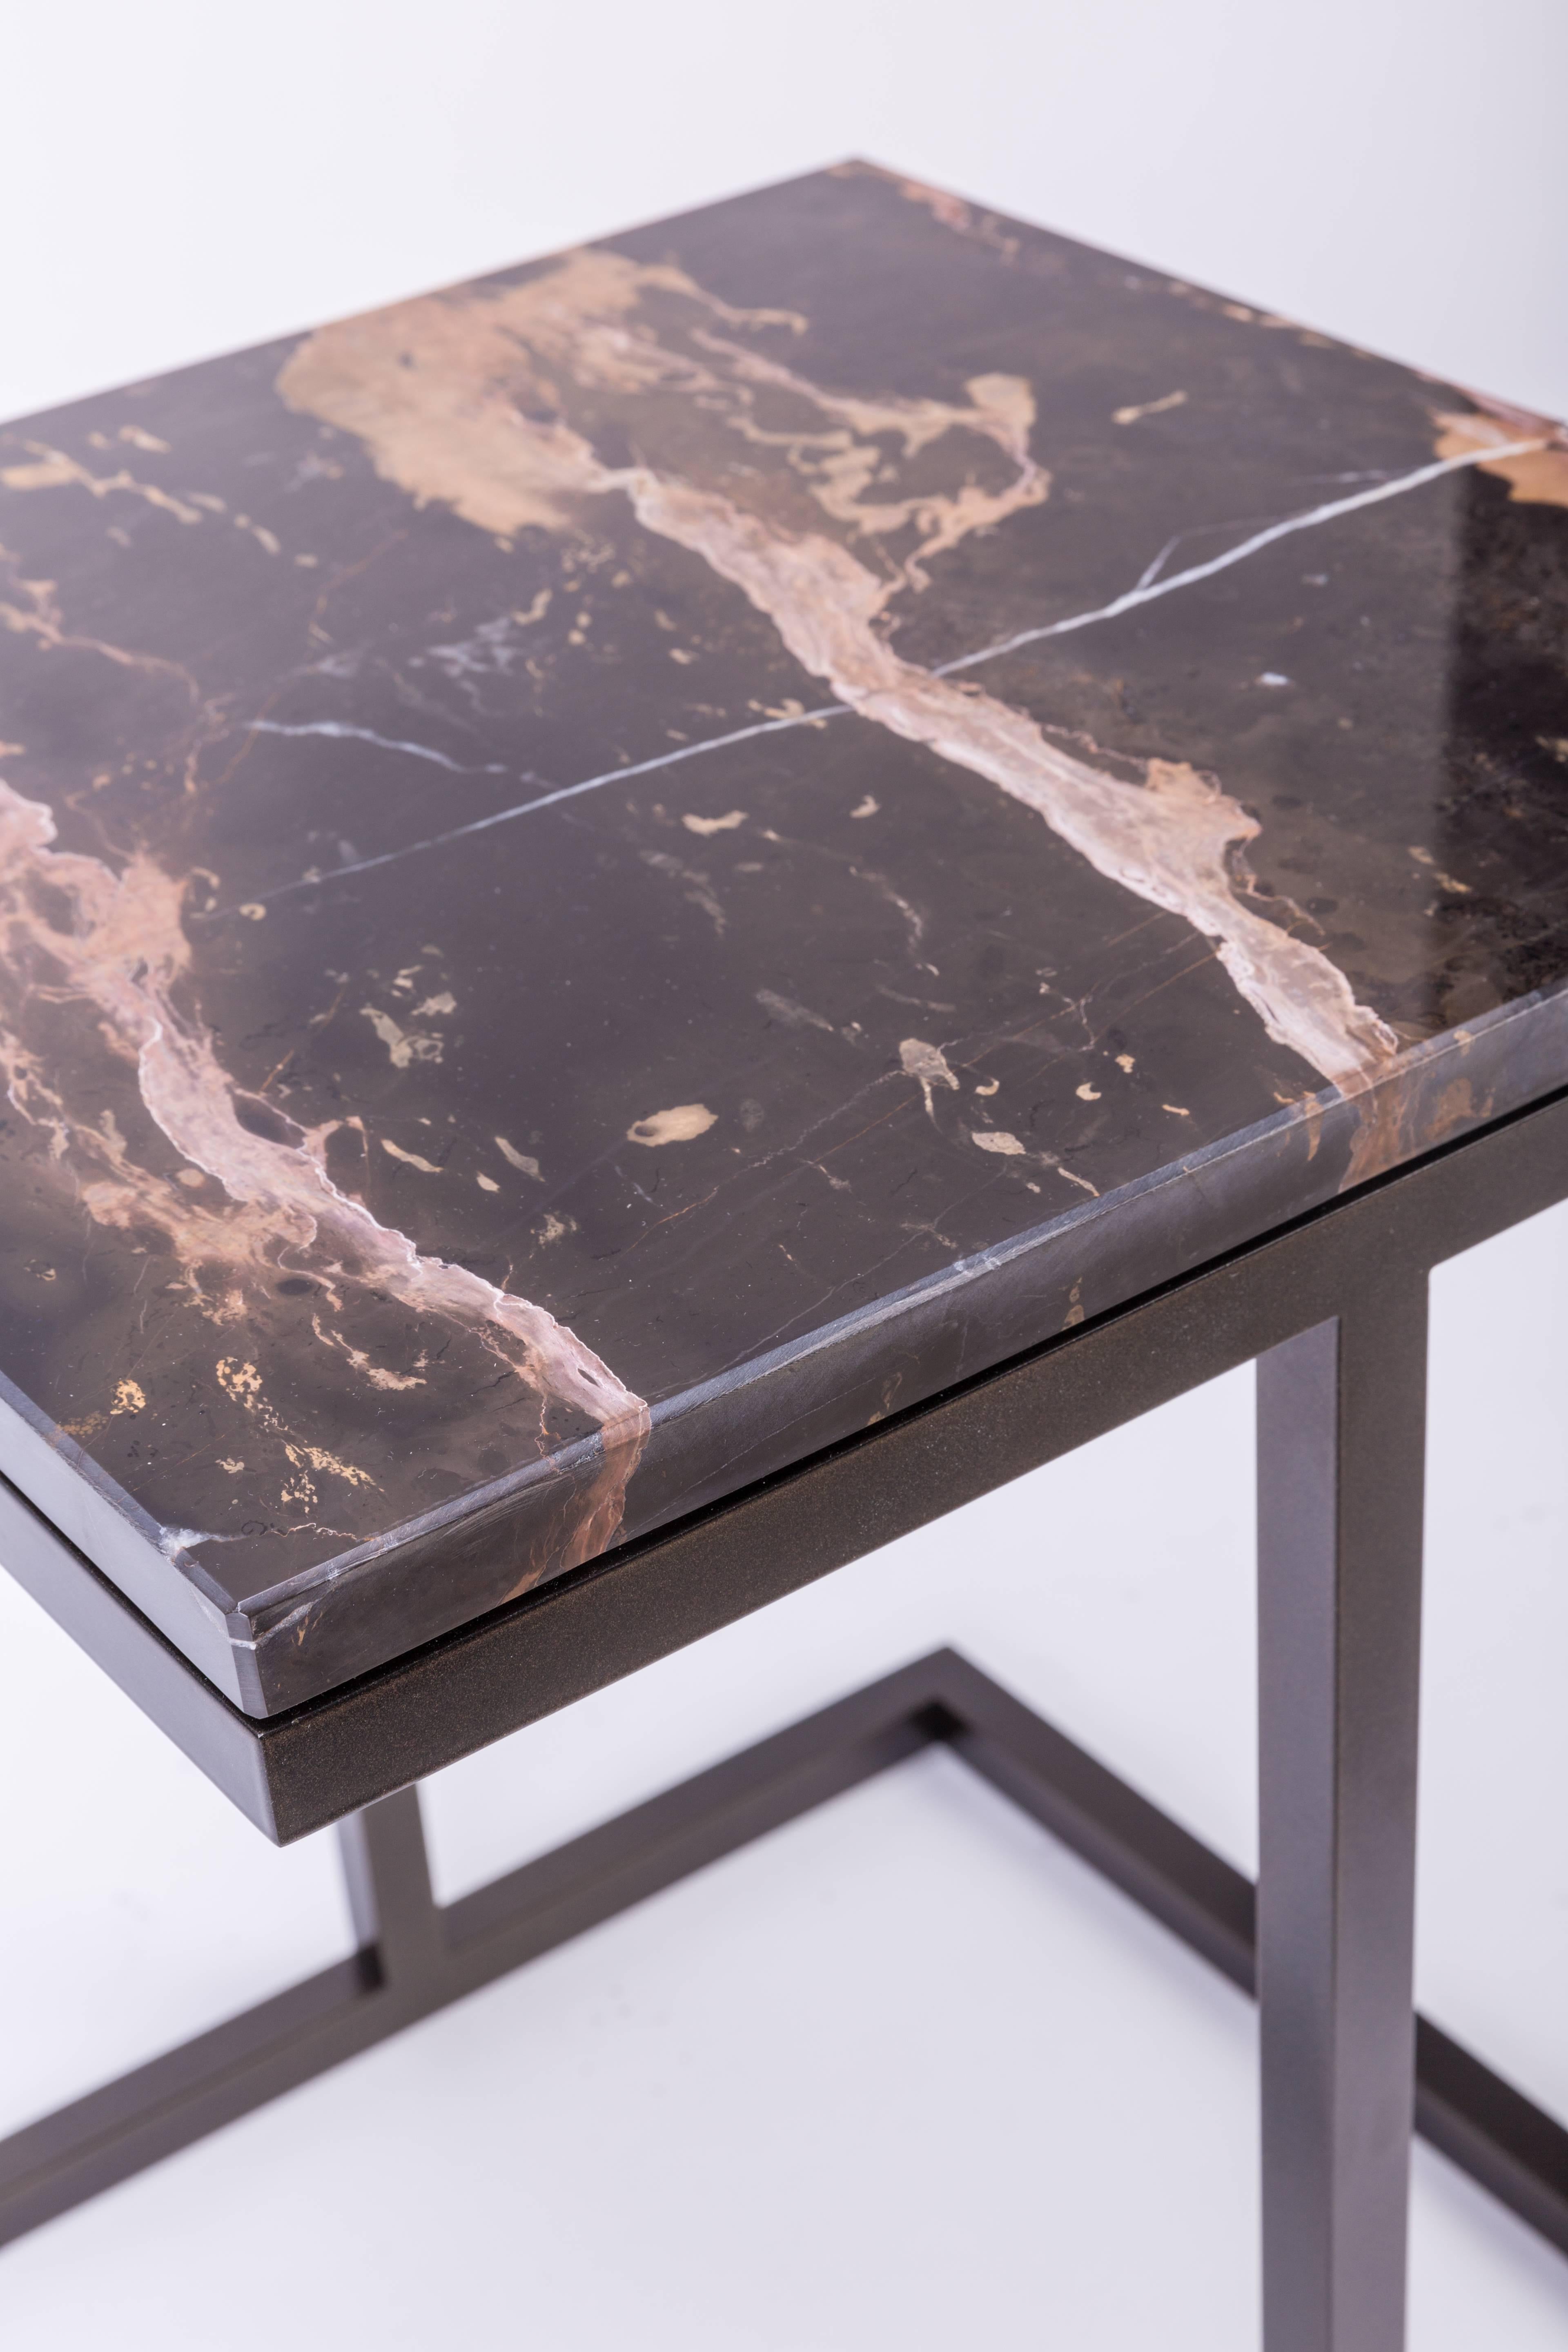 Combining the elegance and simplicity of a square marble top with a structural steel base, the Bacco coffee table attains sharp, contemporary aesthetics. The striking table comes with a choice of three luxurious surface options, including dark gold,